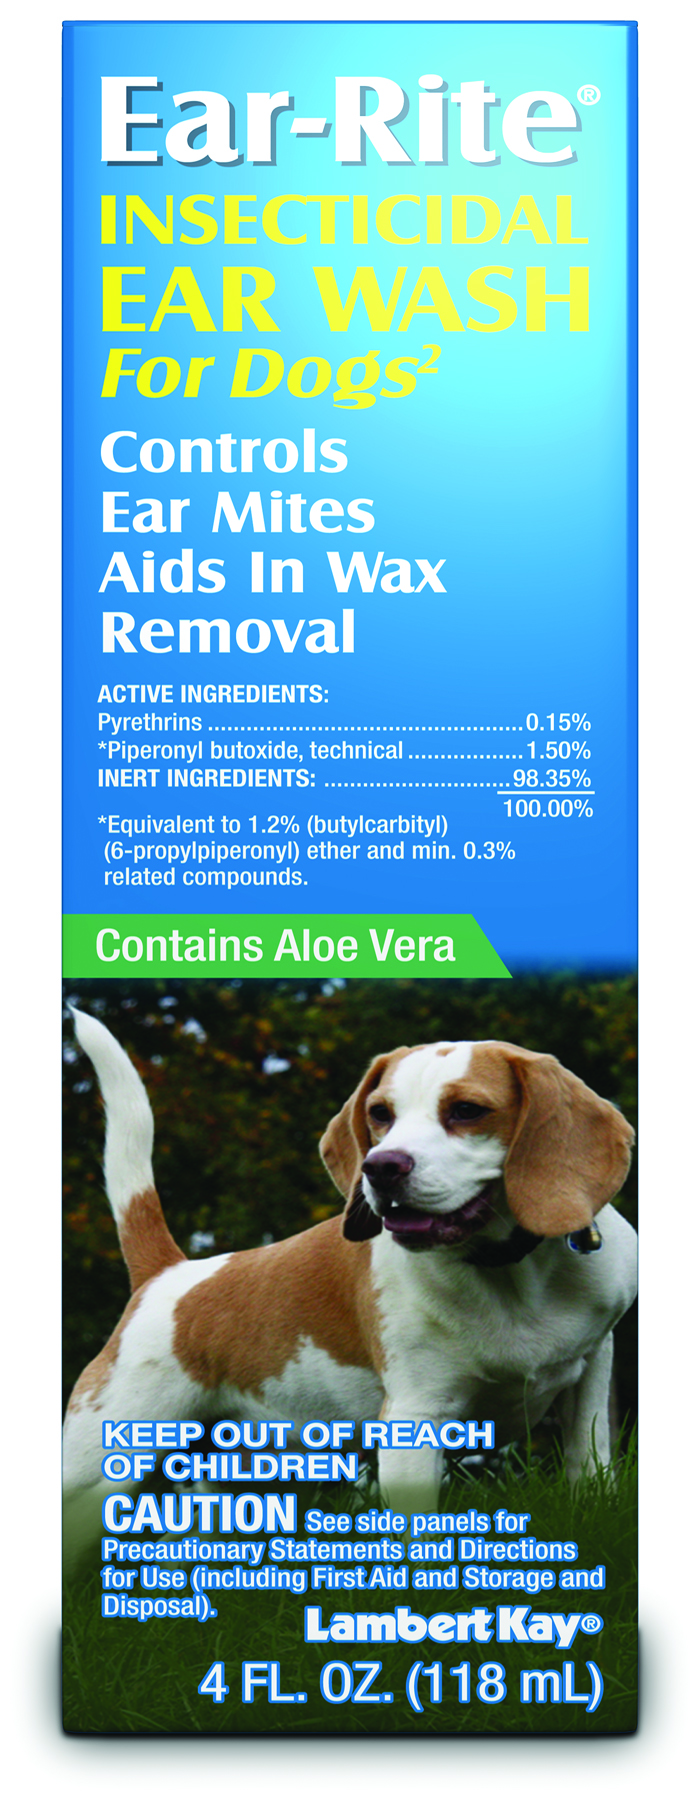 Ear Rite Insecticidal Ear Wash For Dogs - 4oz.